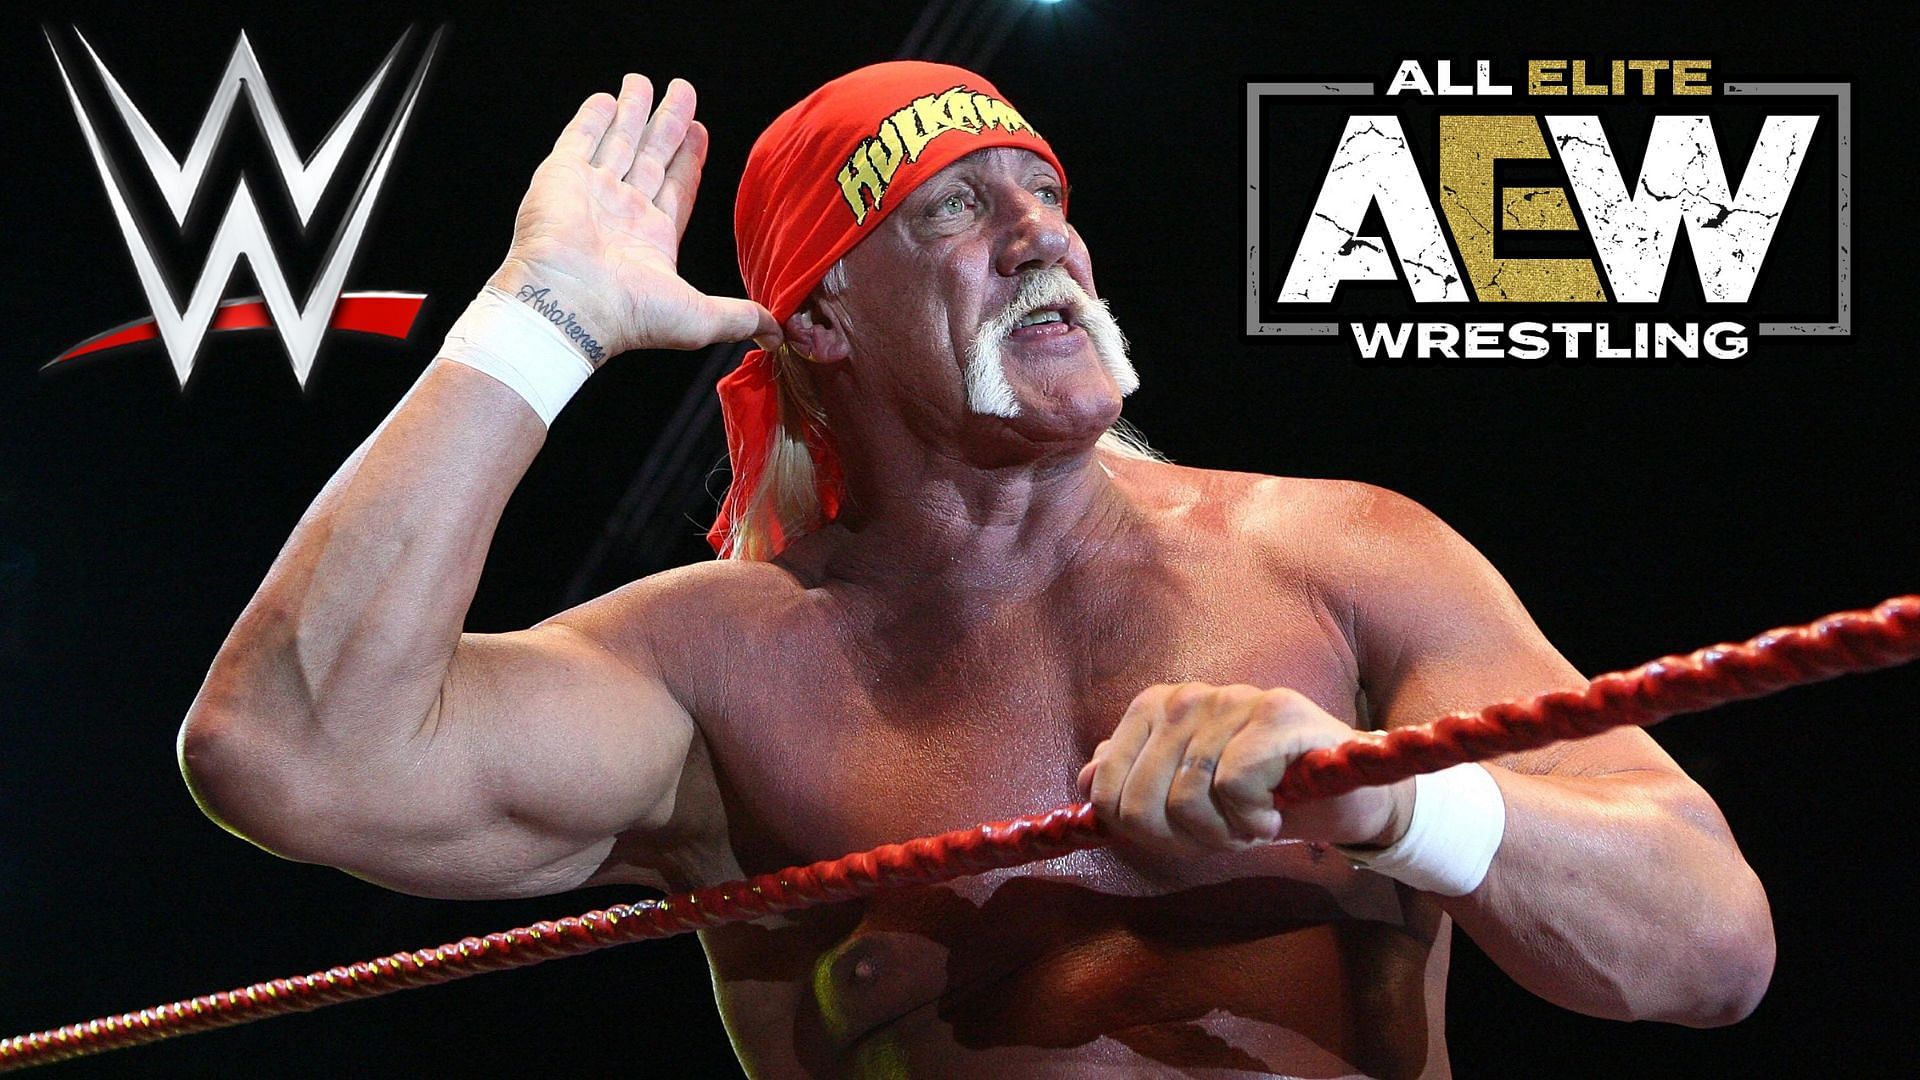 Hulk Hogan is currently retired from pro-wrestling